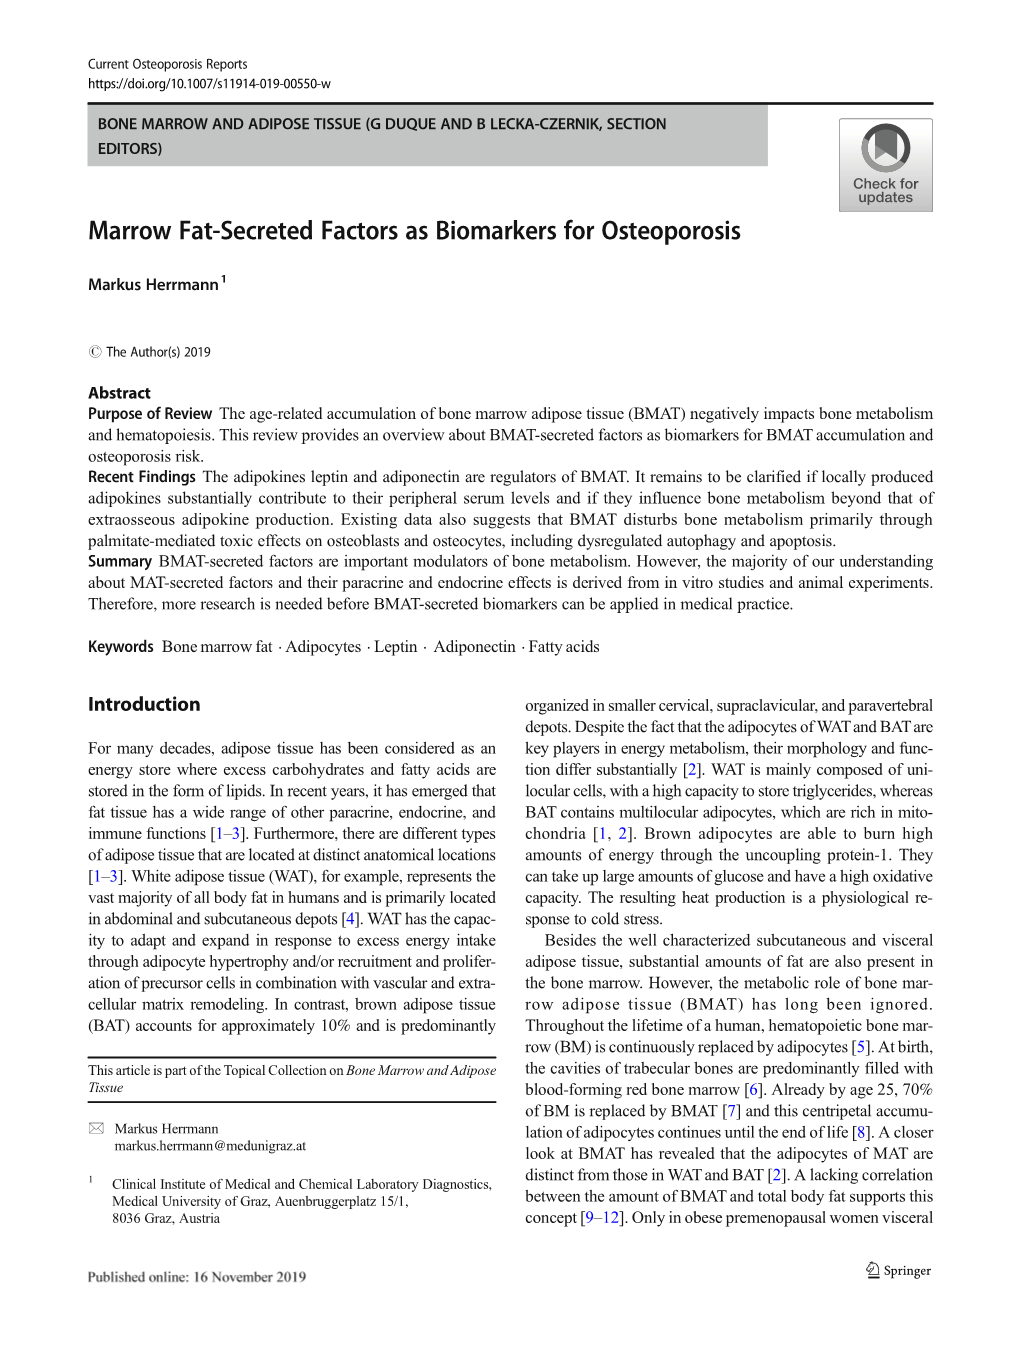 Marrow Fat-Secreted Factors As Biomarkers for Osteoporosis